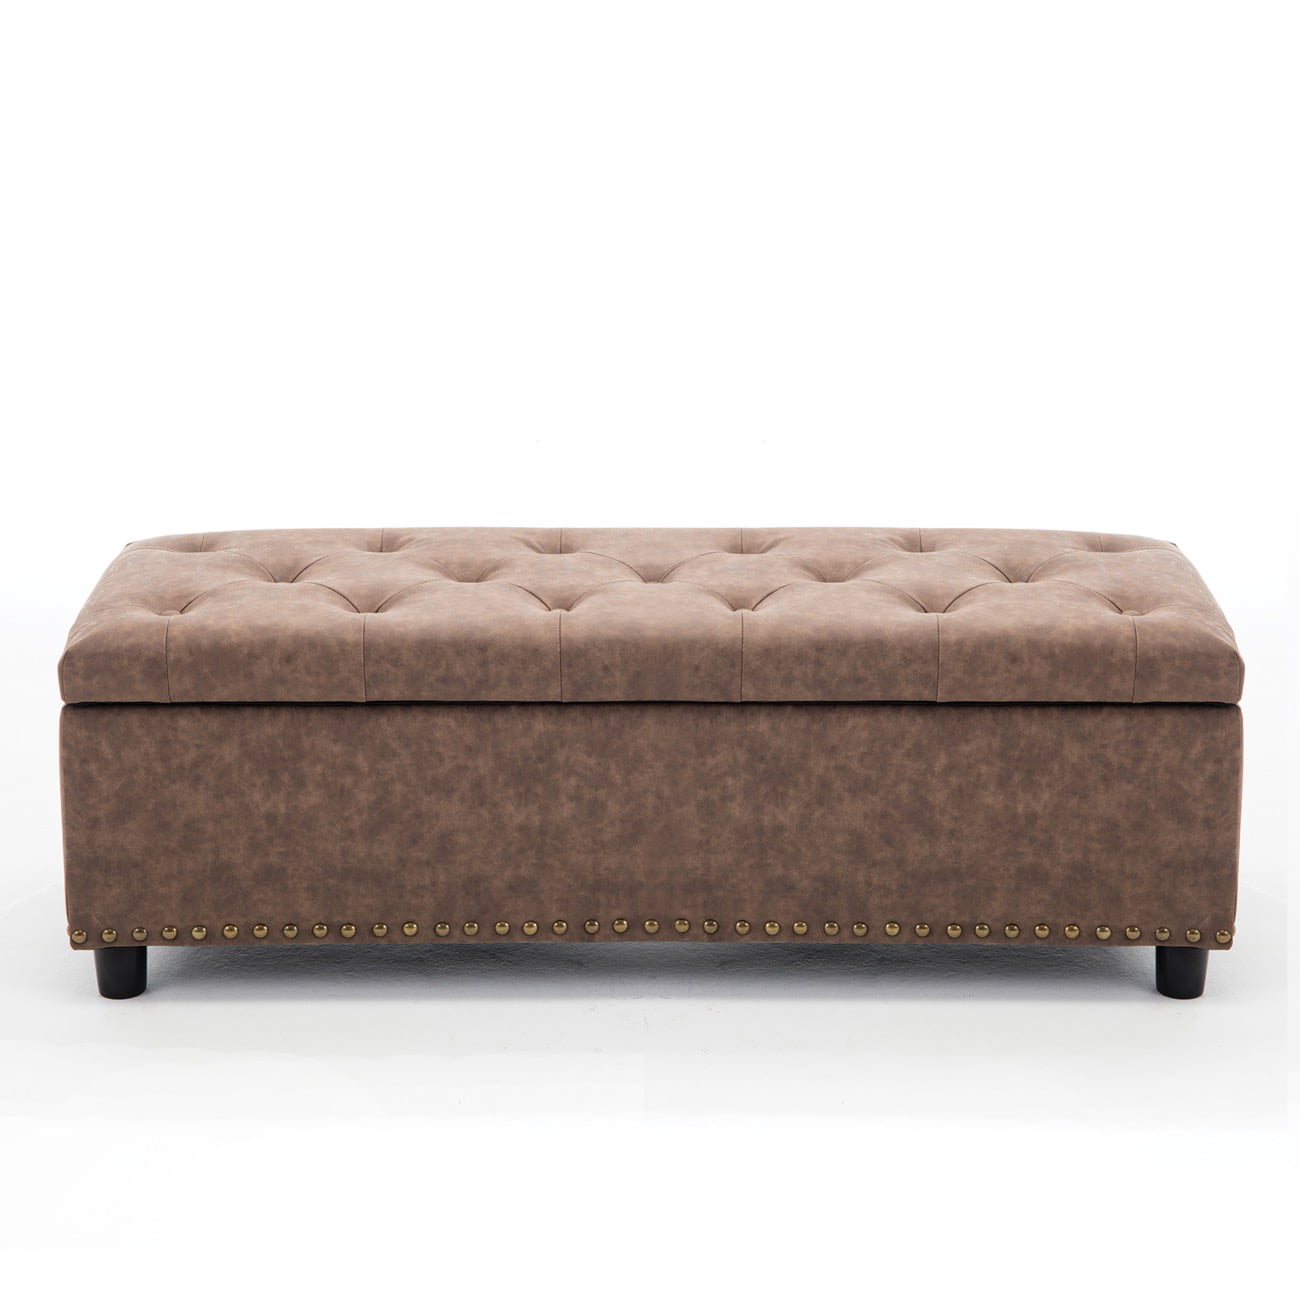 Belleze 48 Upholstered Faux Leather, Leather Tufted Storage Ottoman